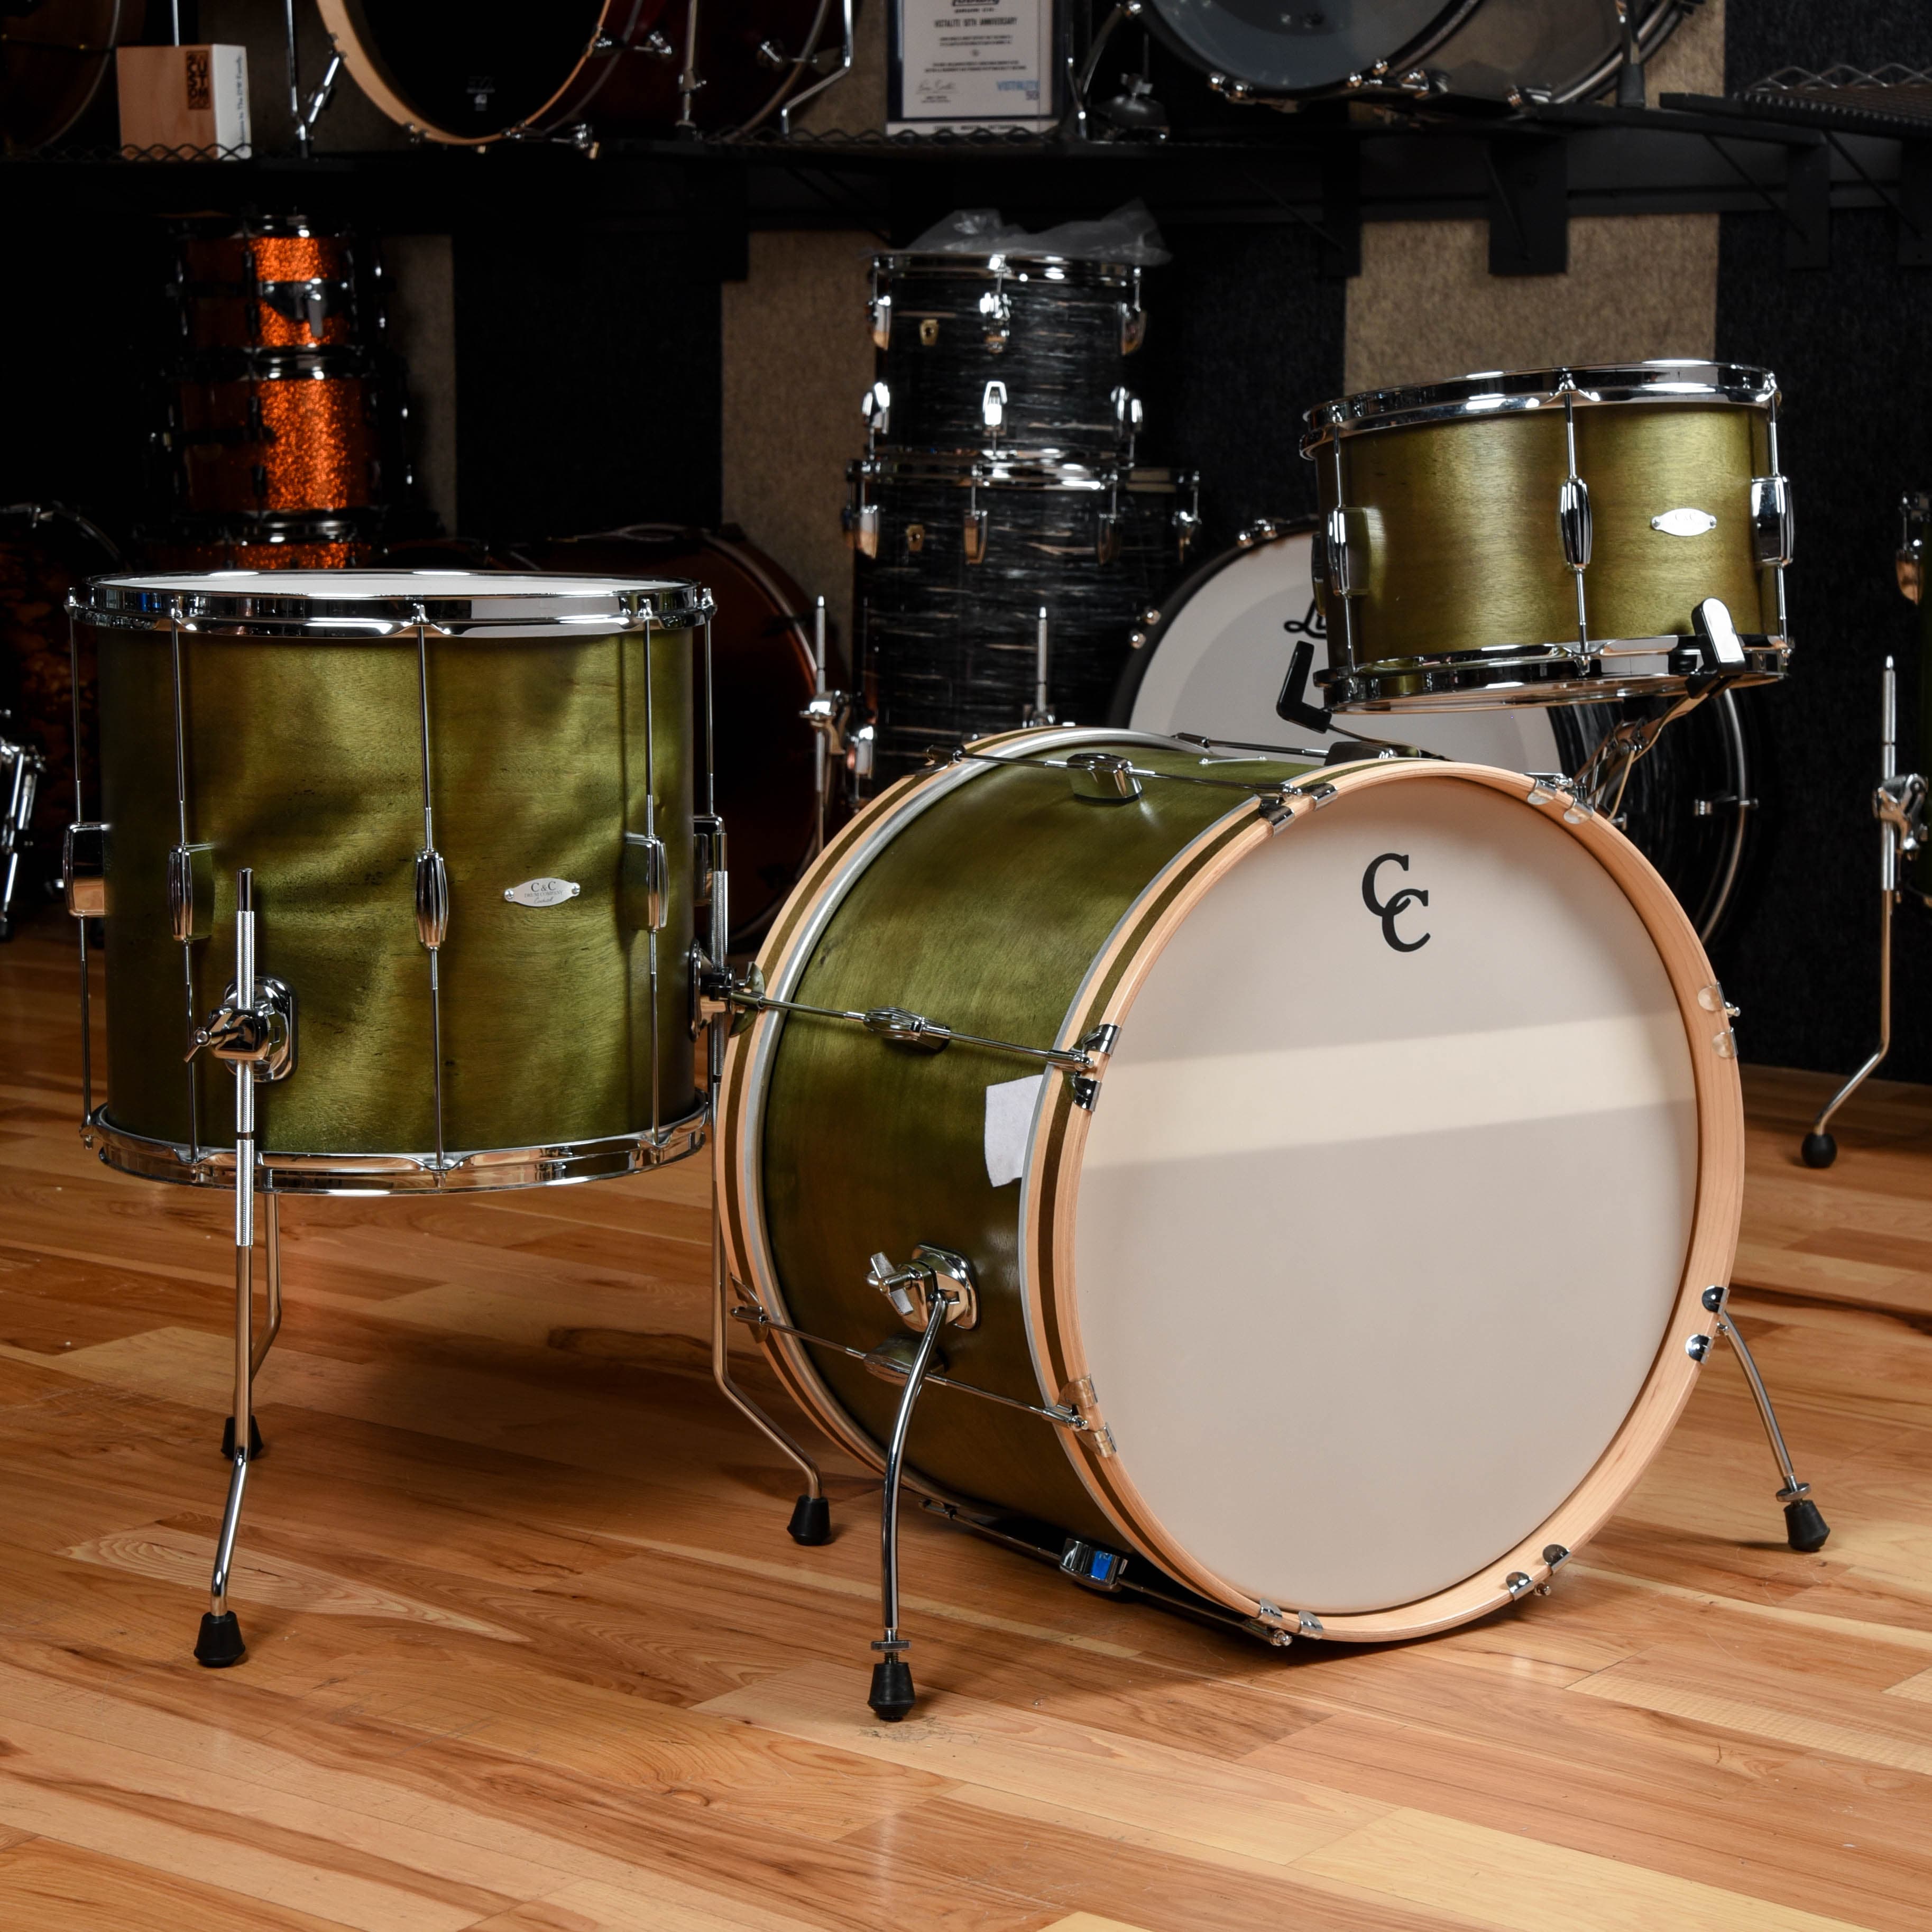 C&C Player Date 1 13/16/22 3pc. Drum Kit Olive Drab Vintage Gloss Drums and Percussion / Acoustic Drums / Full Acoustic Kits